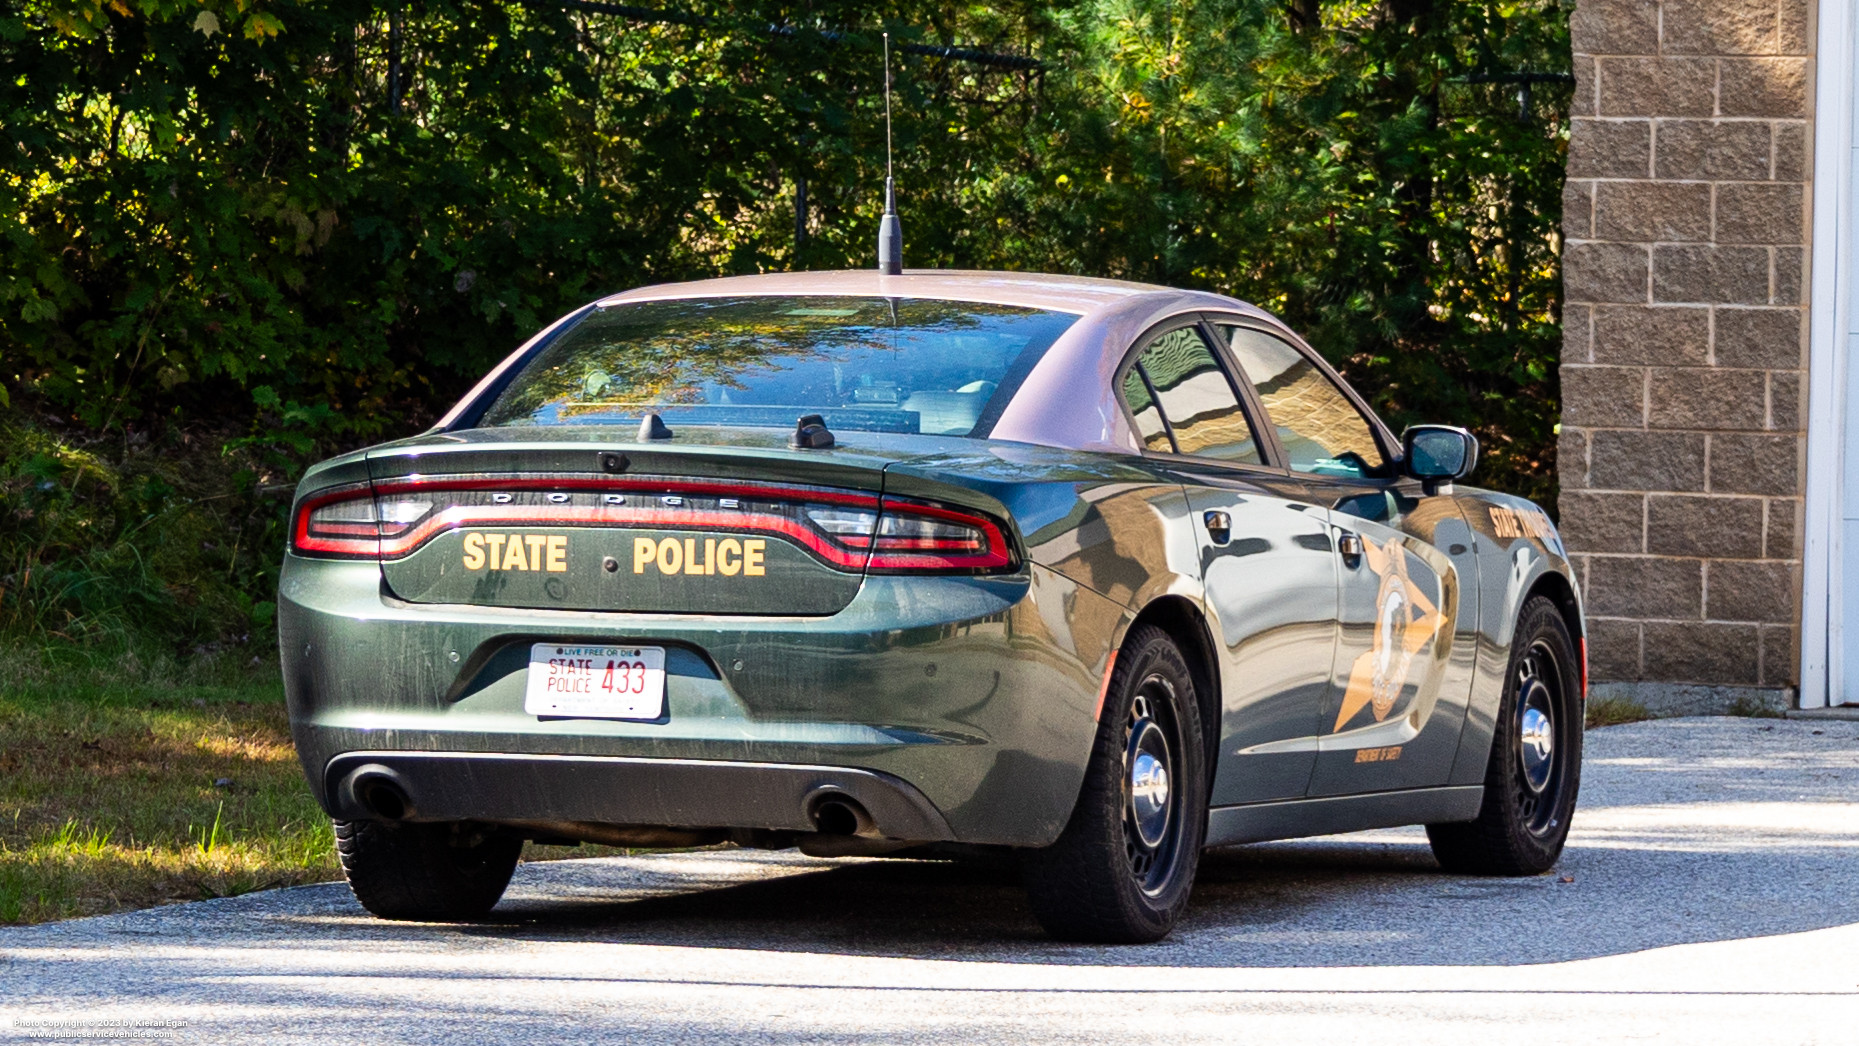 A photo  of New Hampshire State Police
            Cruiser 433, a 2017-2019 Dodge Charger             taken by Kieran Egan